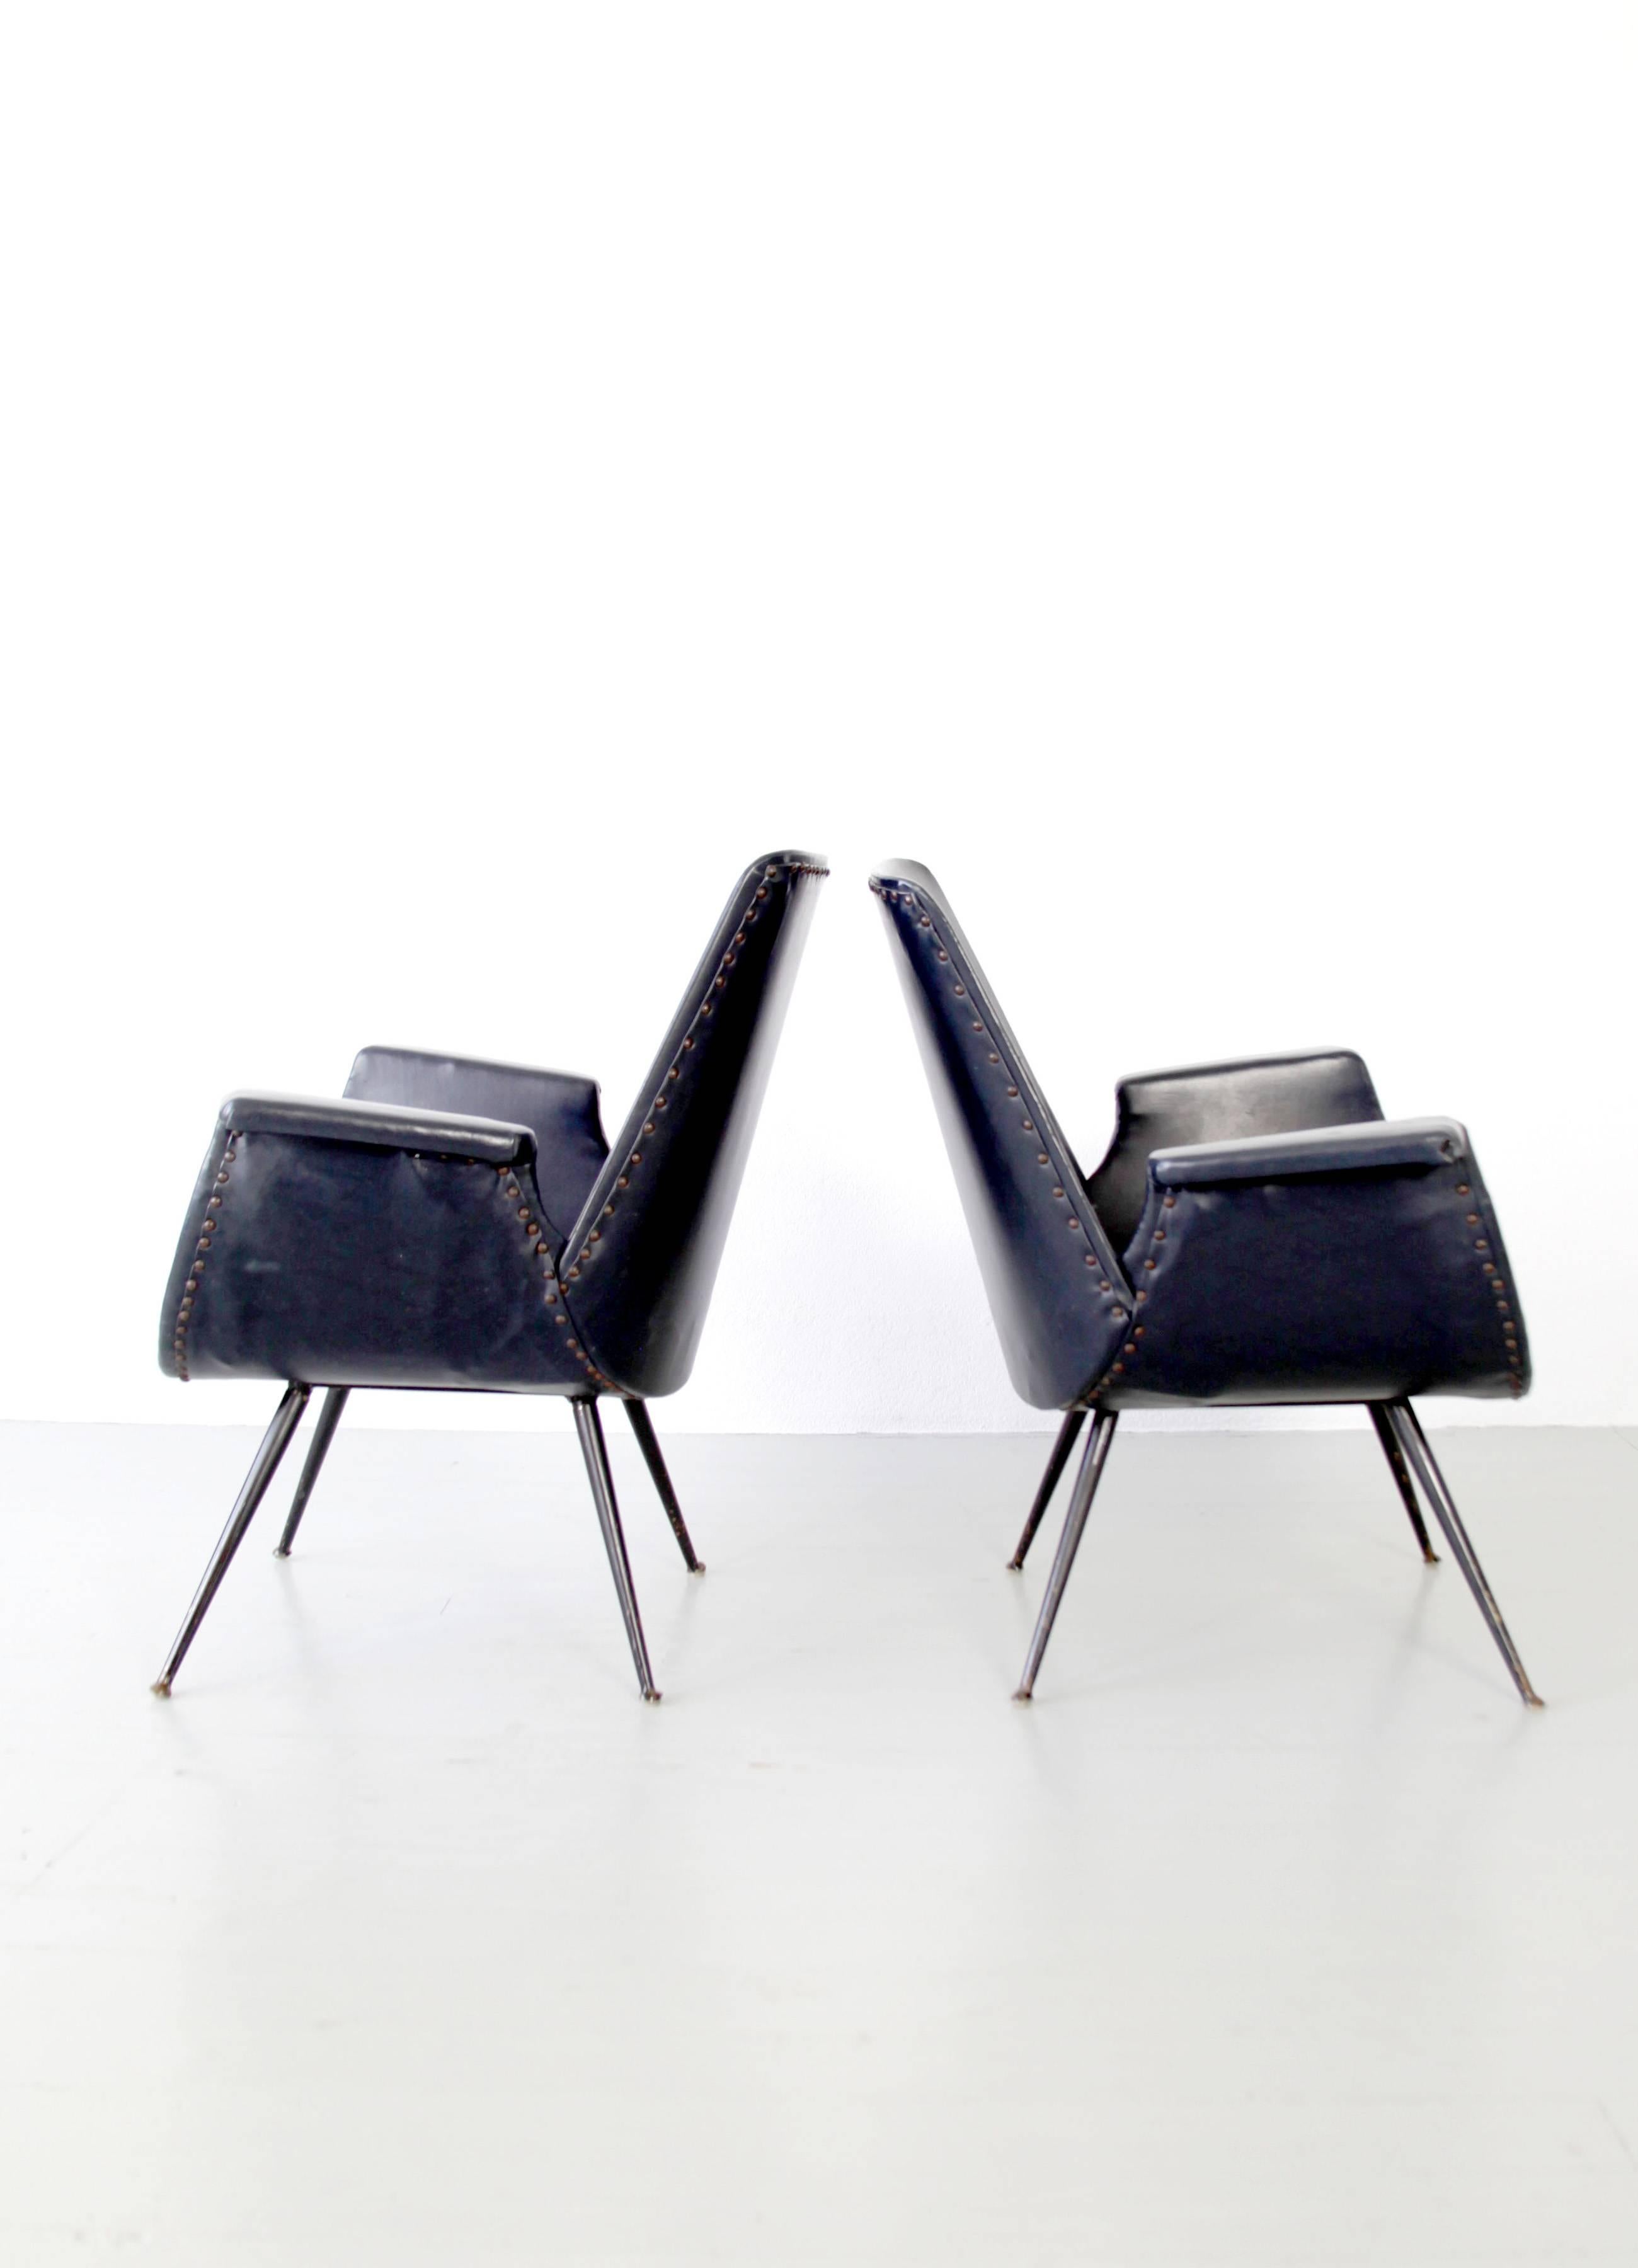 Gastone Rinaldi for RIMA Pair of black Armchairs, 1950s For Sale 1